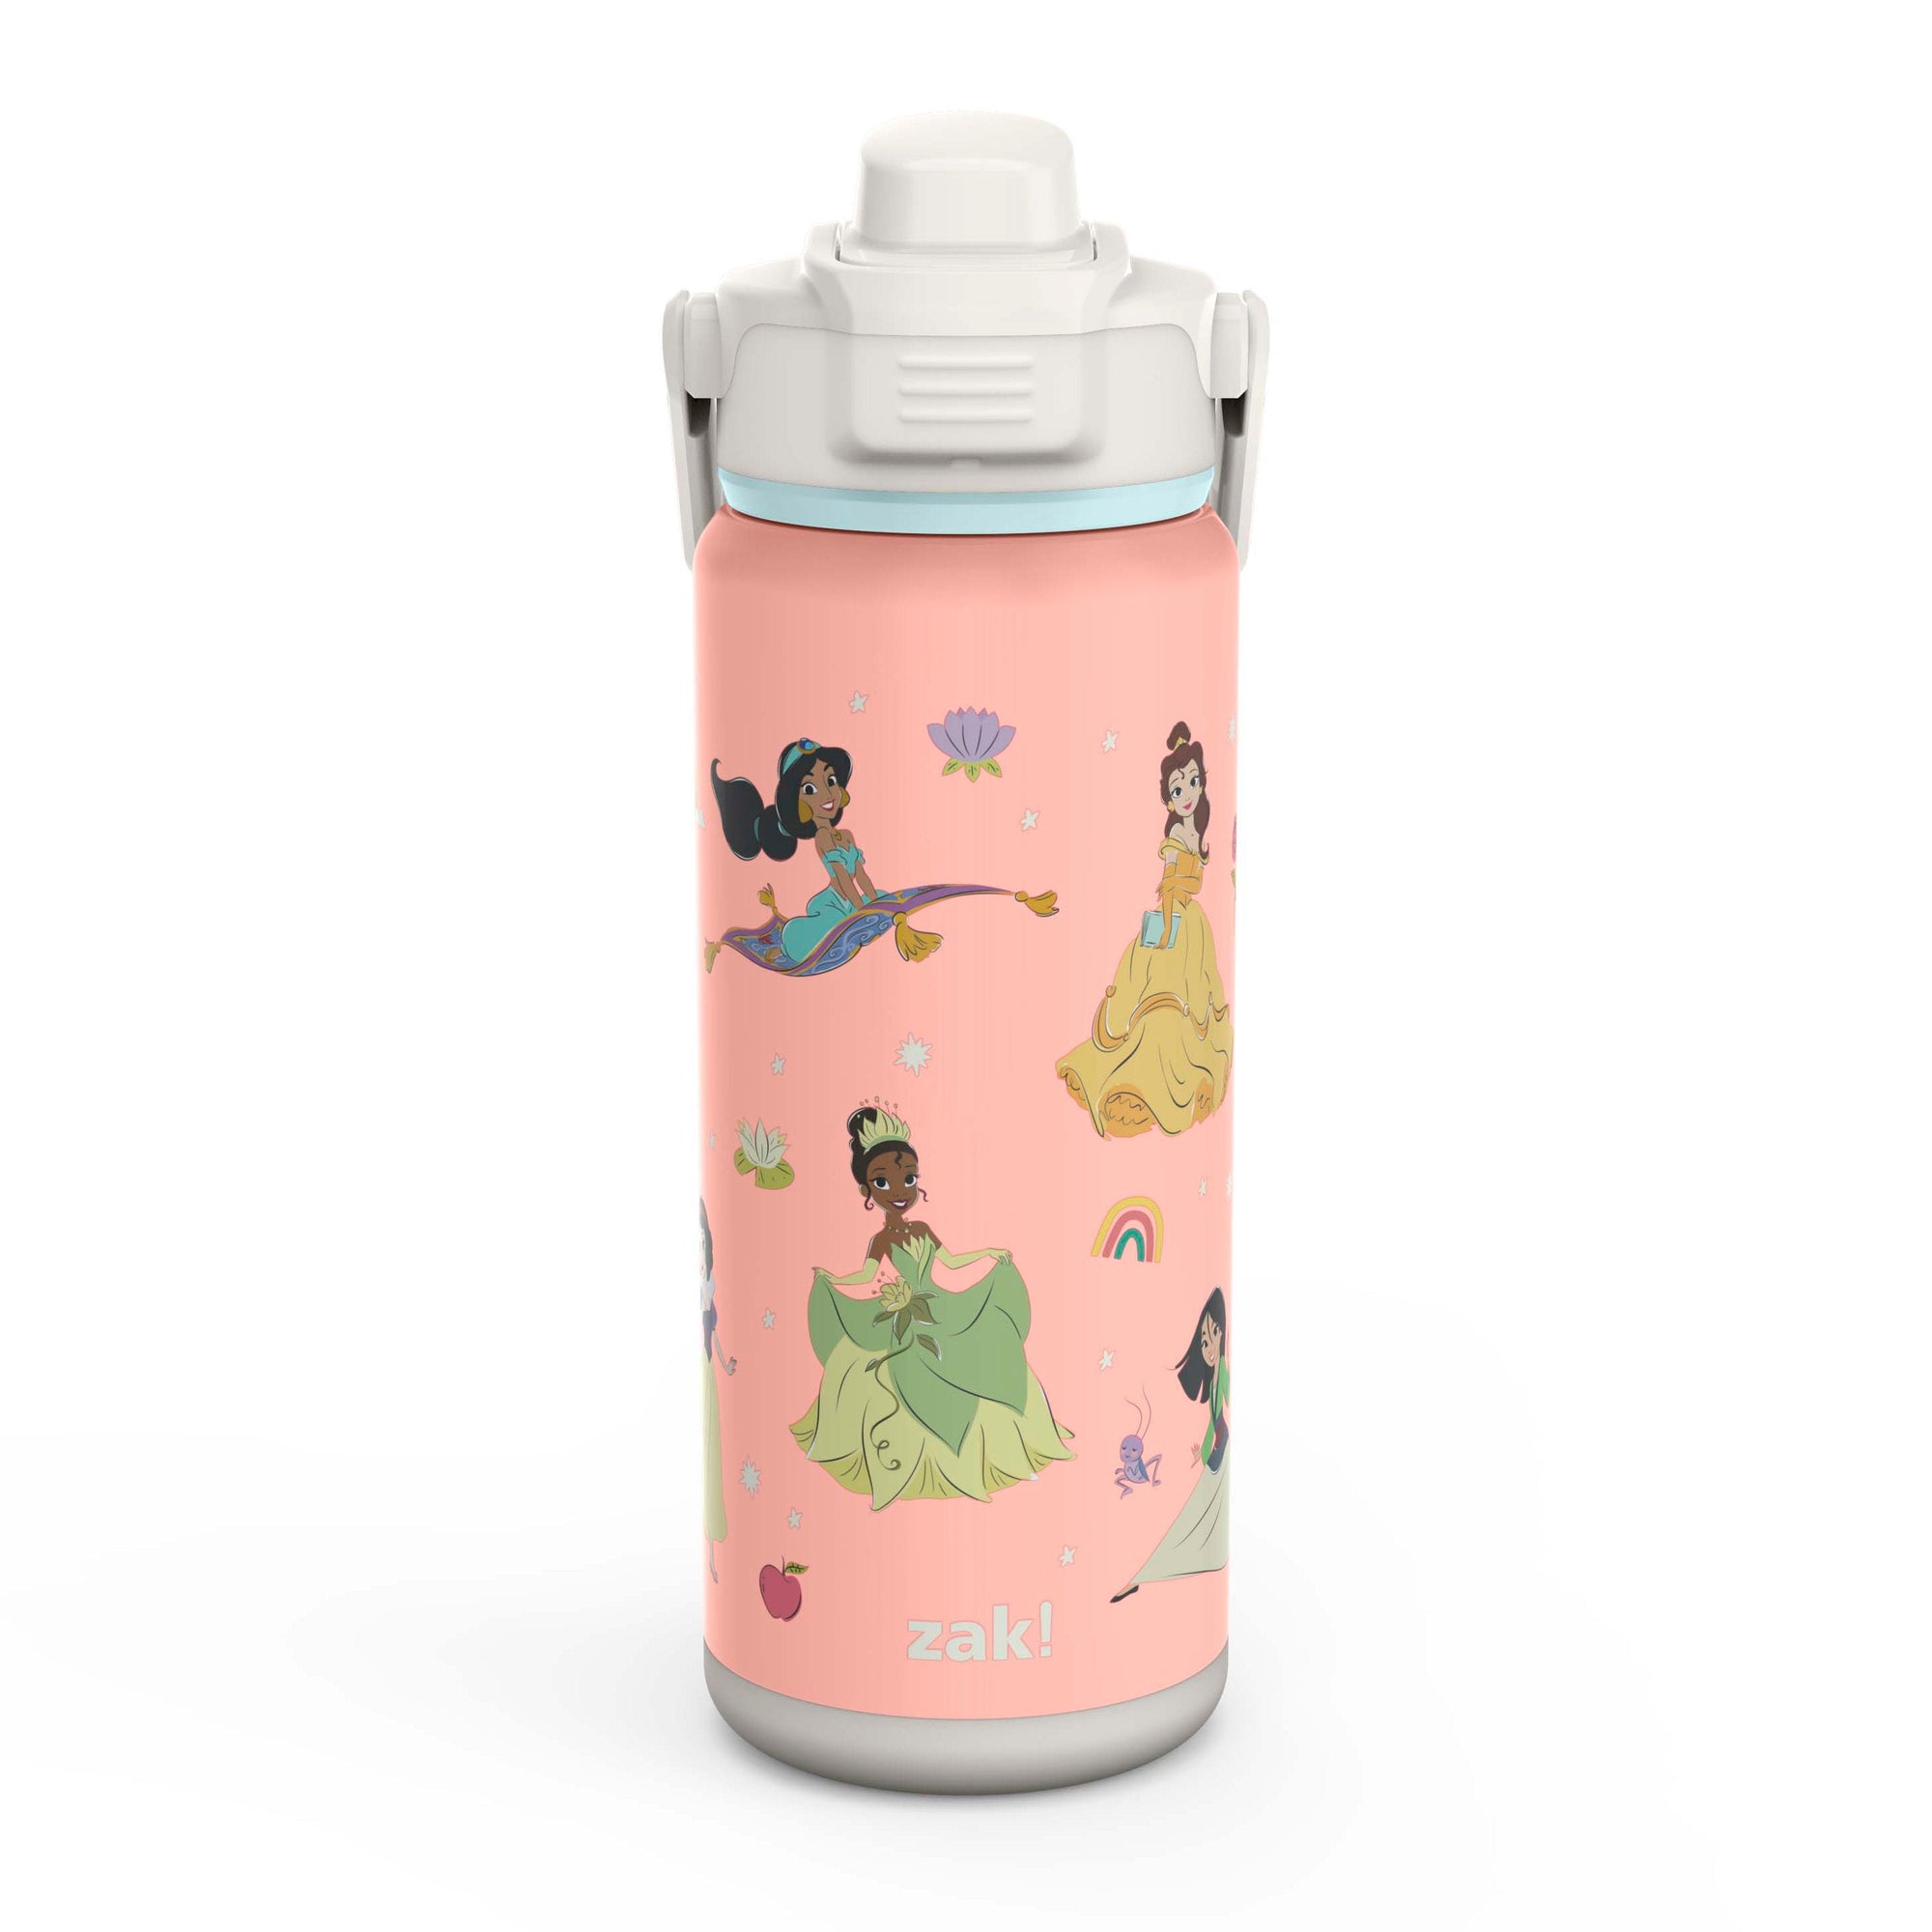 Disney Princess Beacon Stainless Steel Insulated Kids Water Bottle with Covered Spout, 20 Ounces